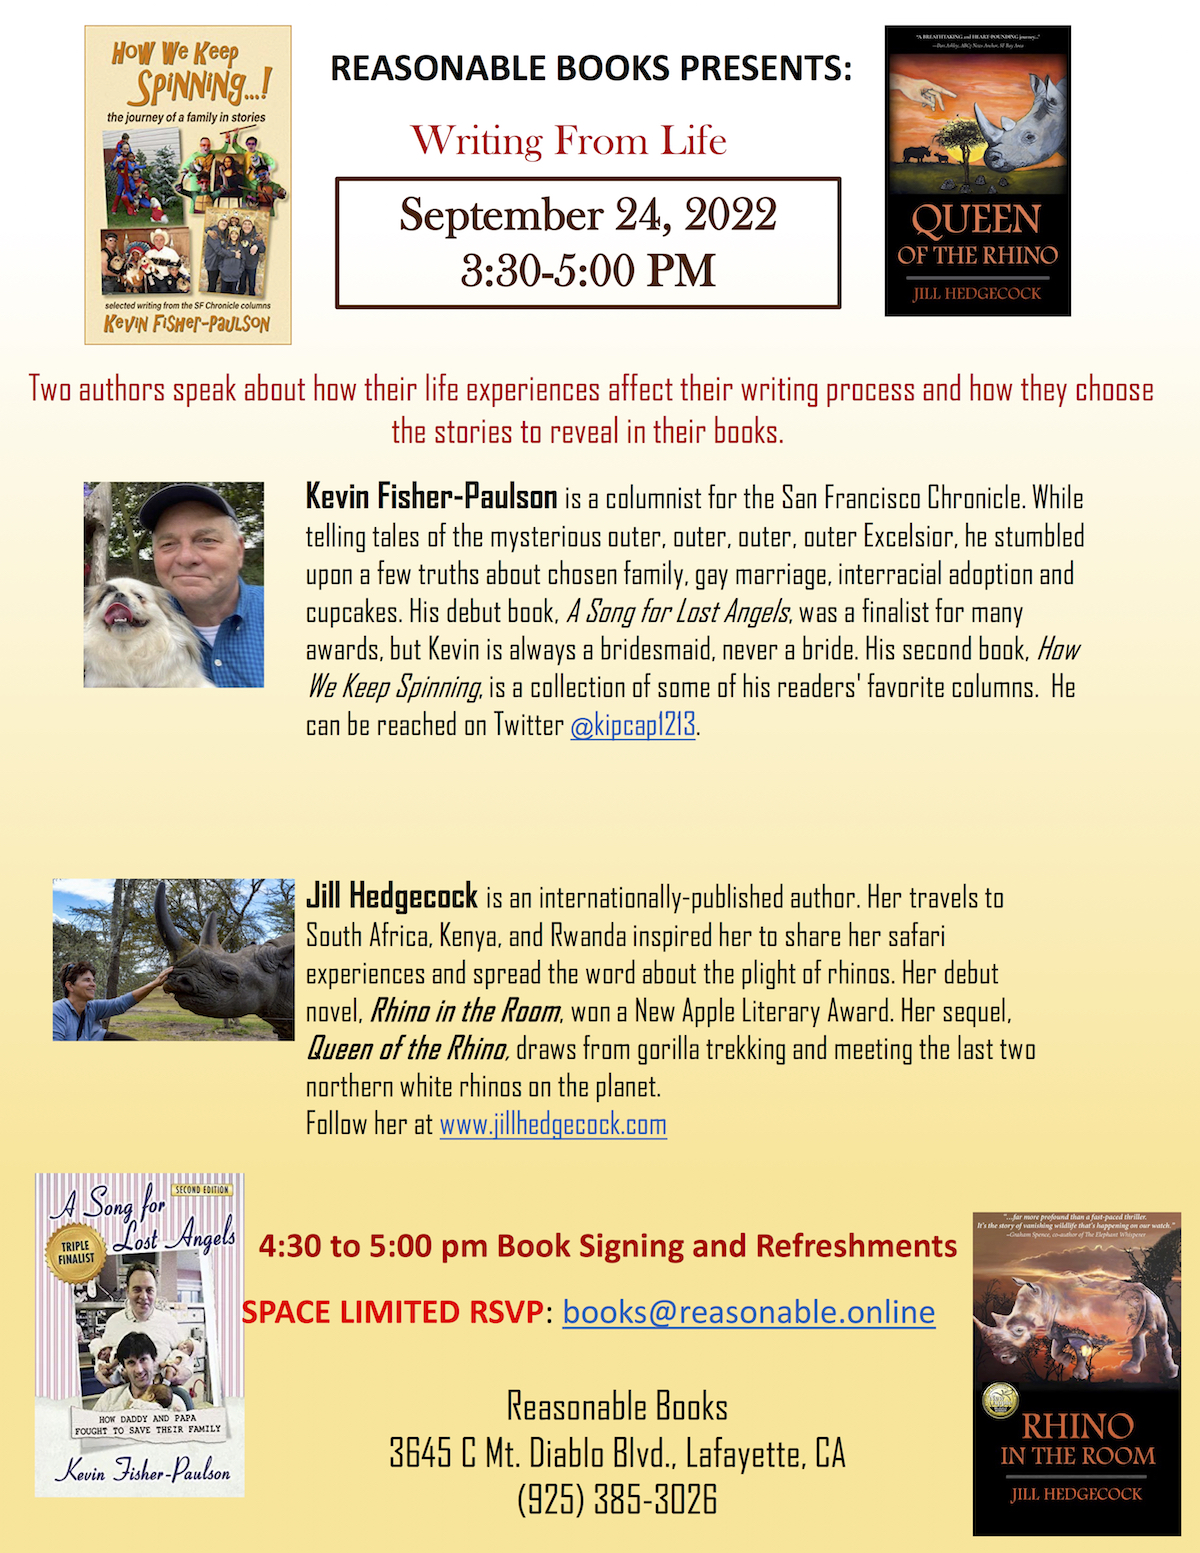 Flyer for author event at Reasonable Books with Jill Hedgecock and Kevin Fisher-Paulson.